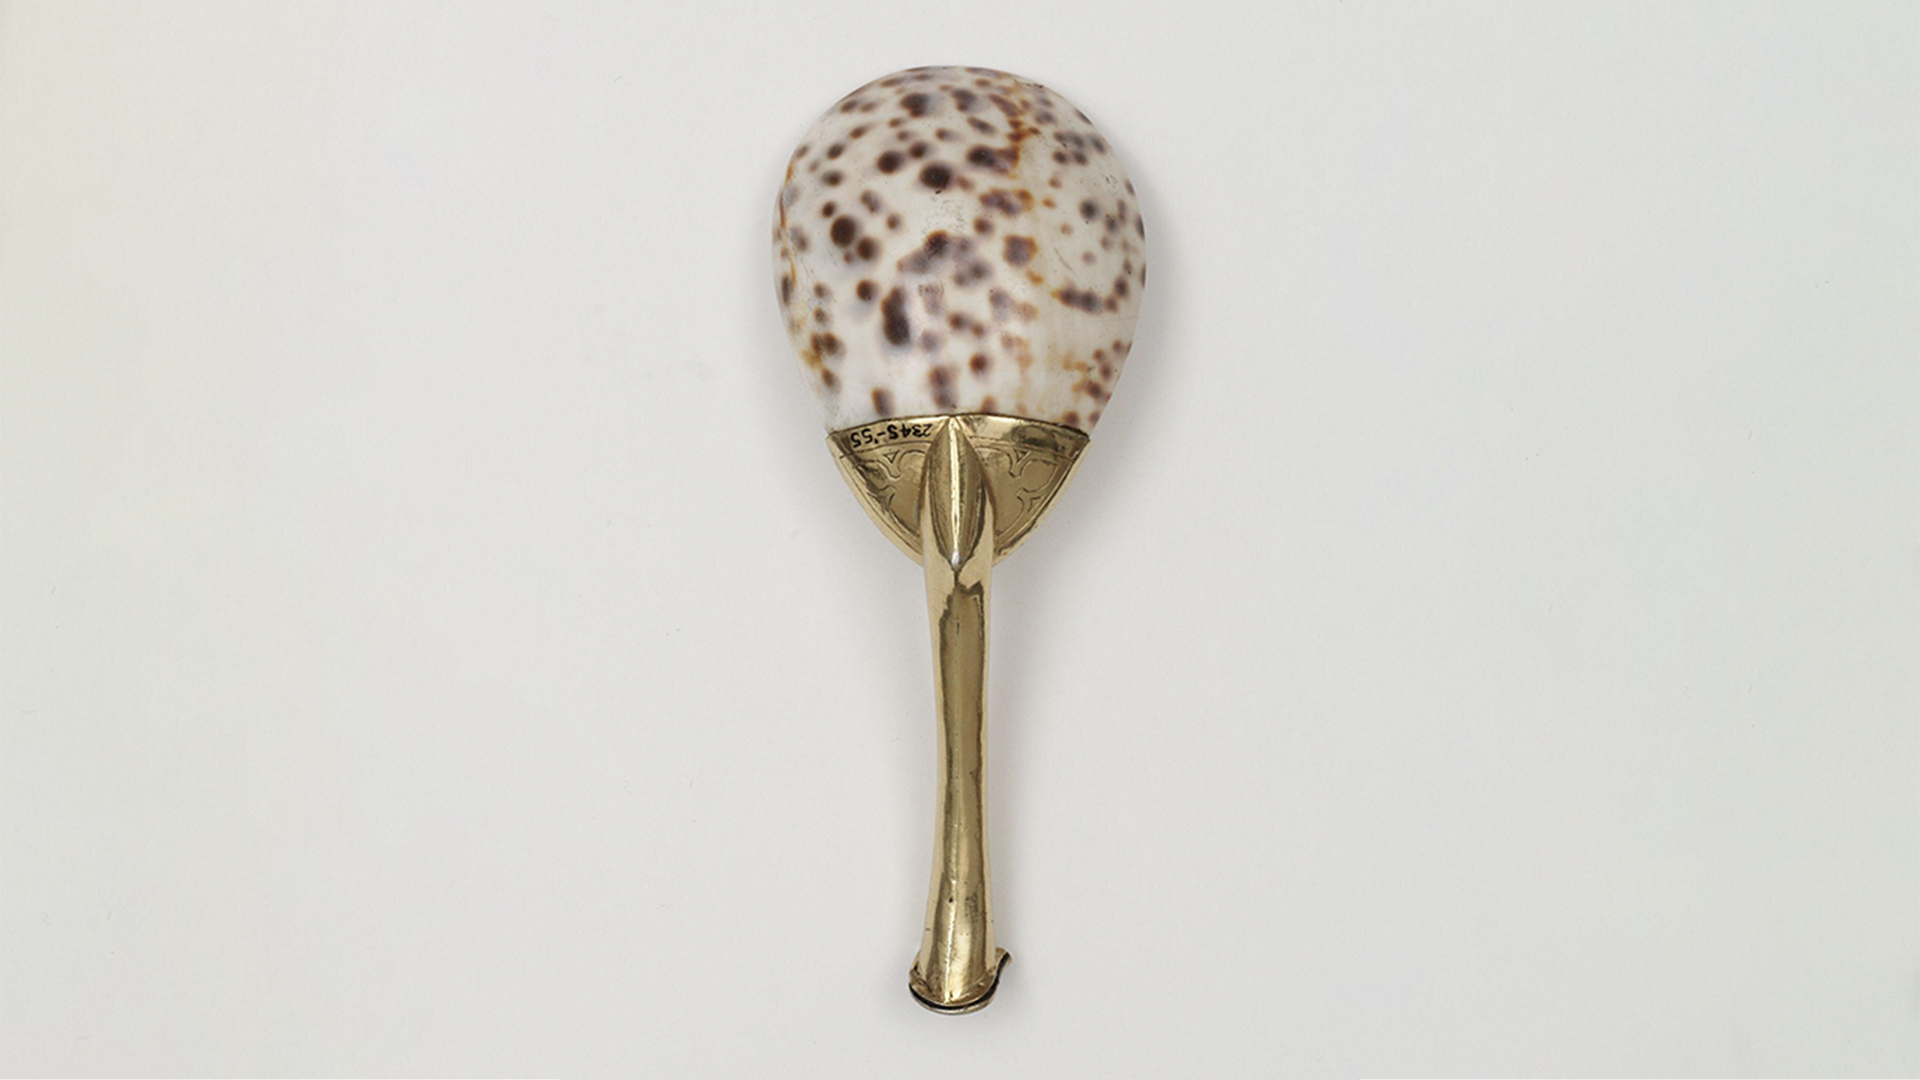 Spoon made from a cowrie shell